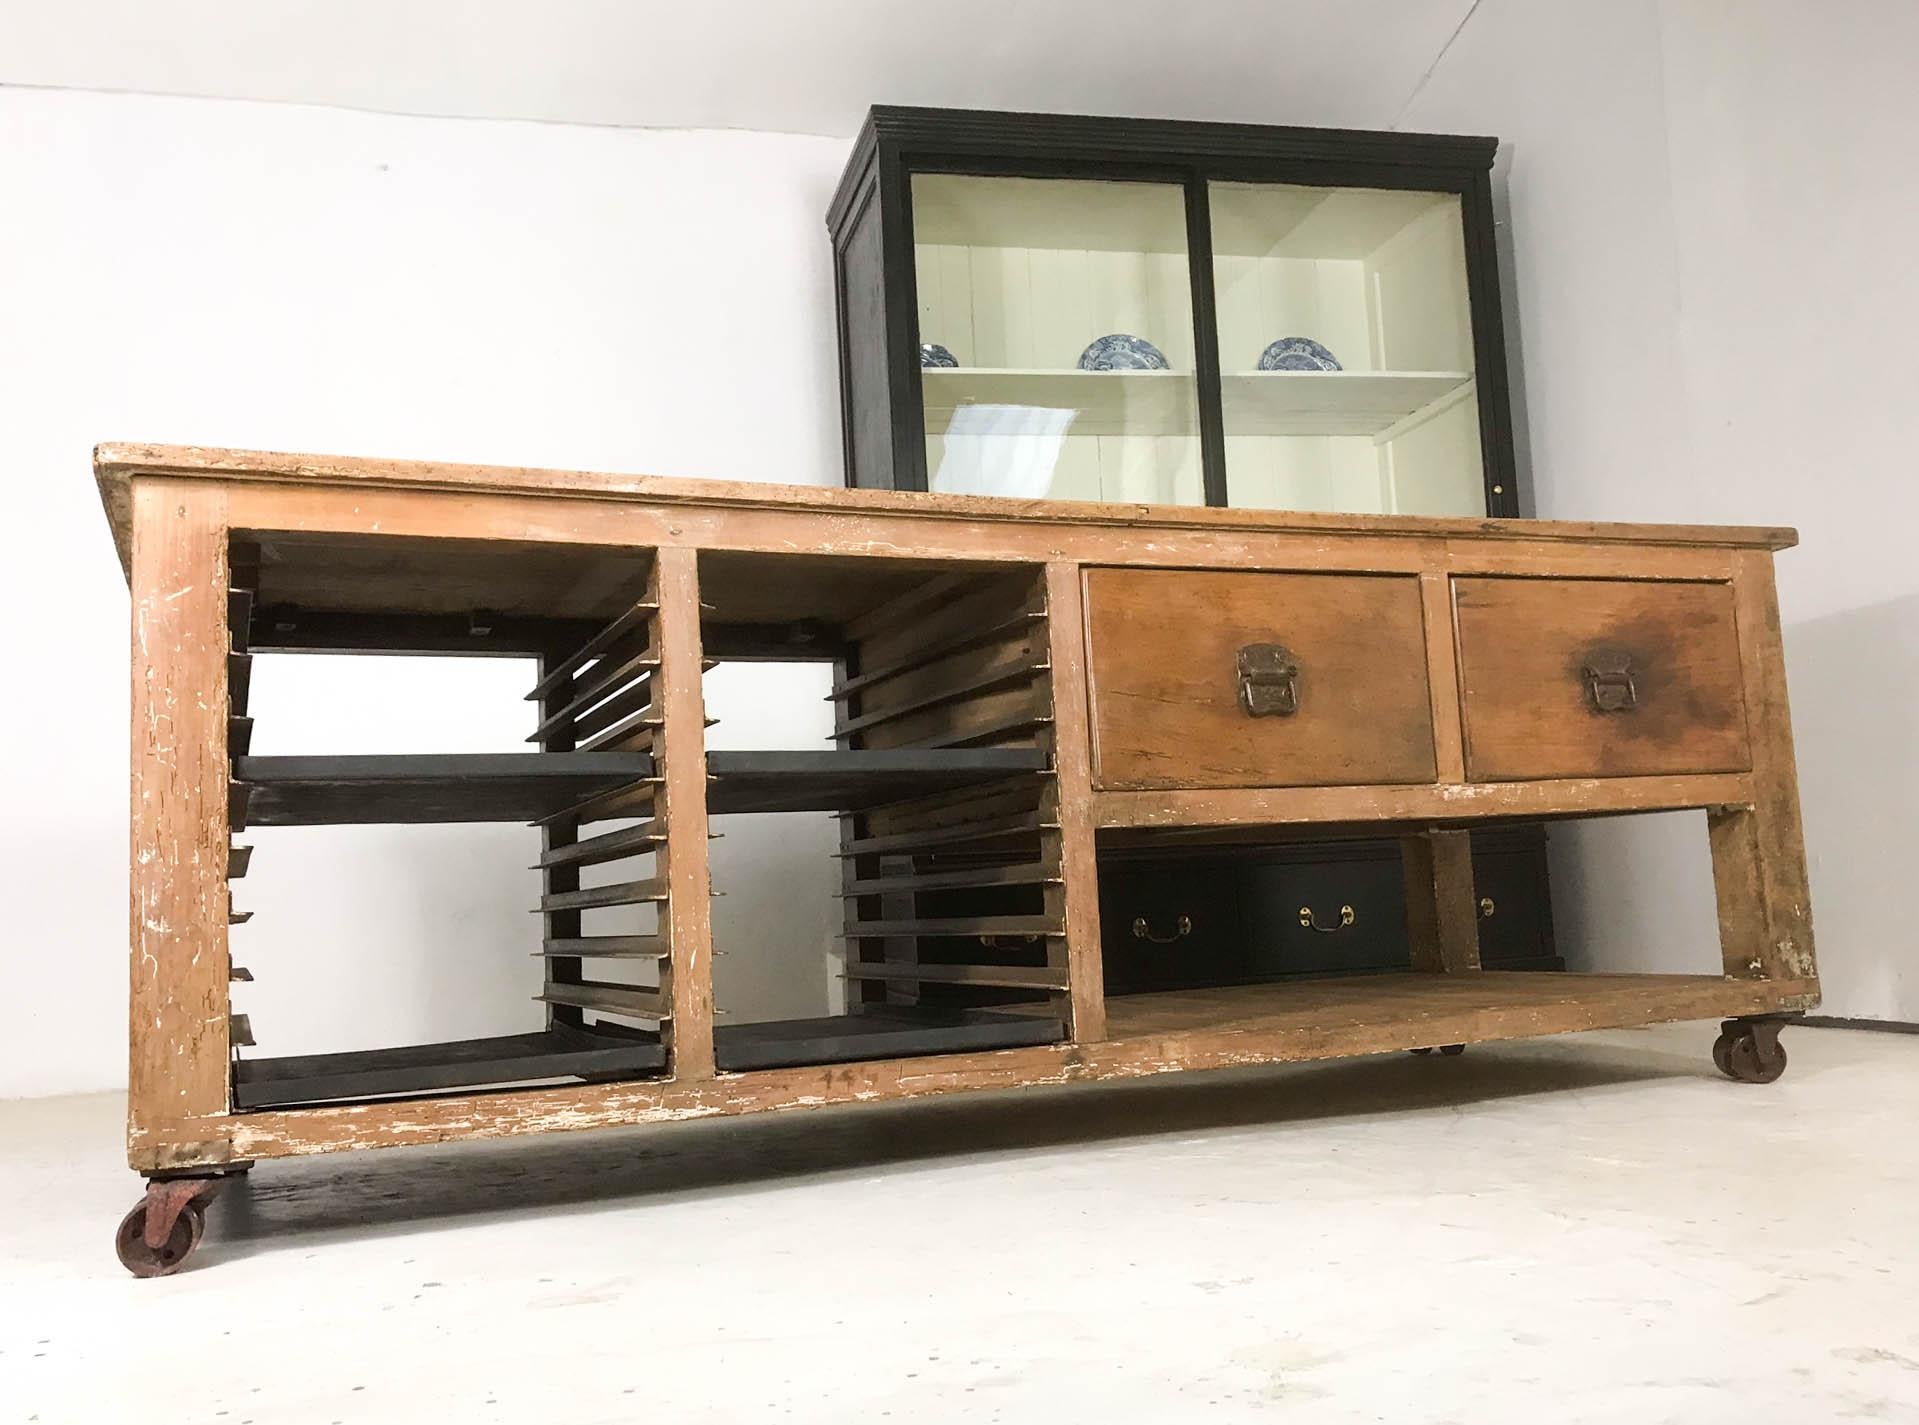 An original early 20th century pine baker's table sourced, along with a pine display cabinet, from a family run bakery on West Street, Camarthen in South Wales. The top is made from sycamore, the most practical and preferred wood of choice by